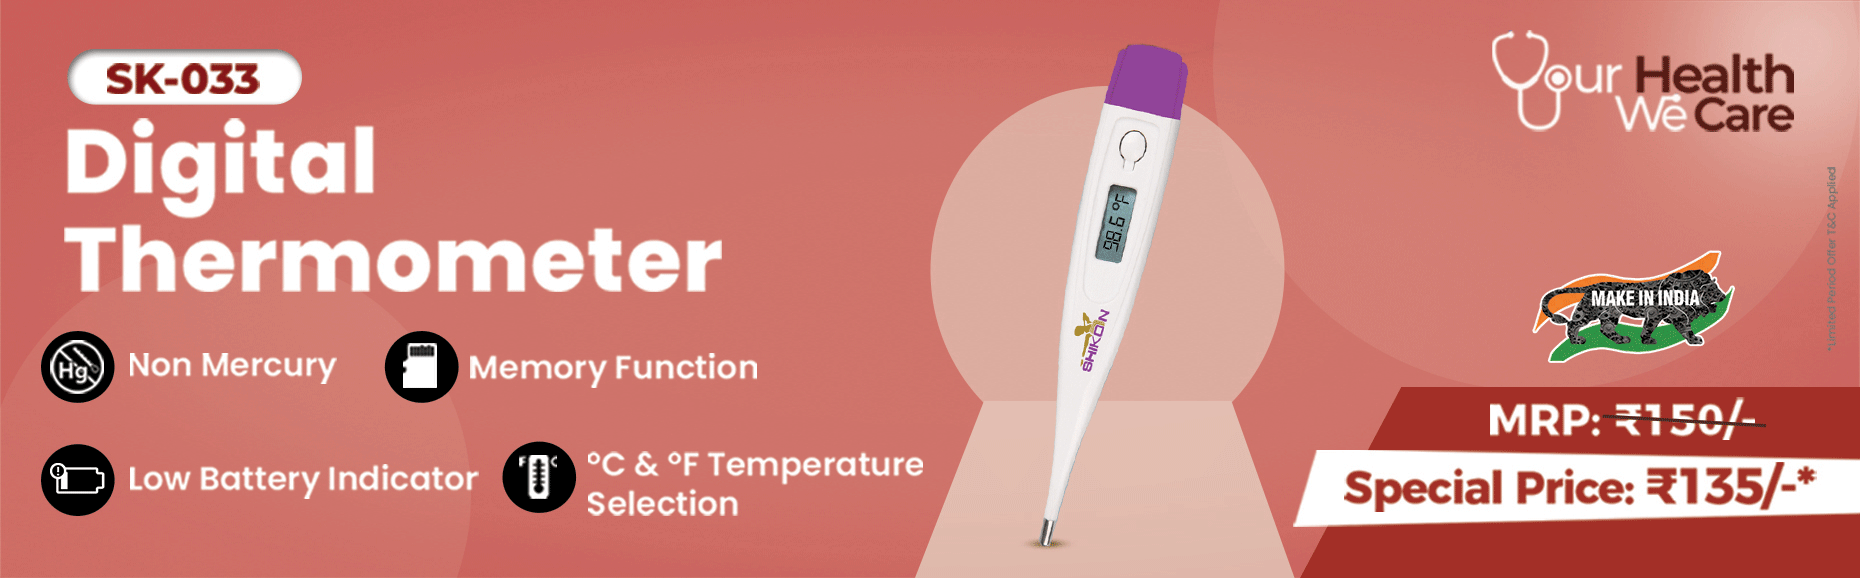 digital thermometer made in india